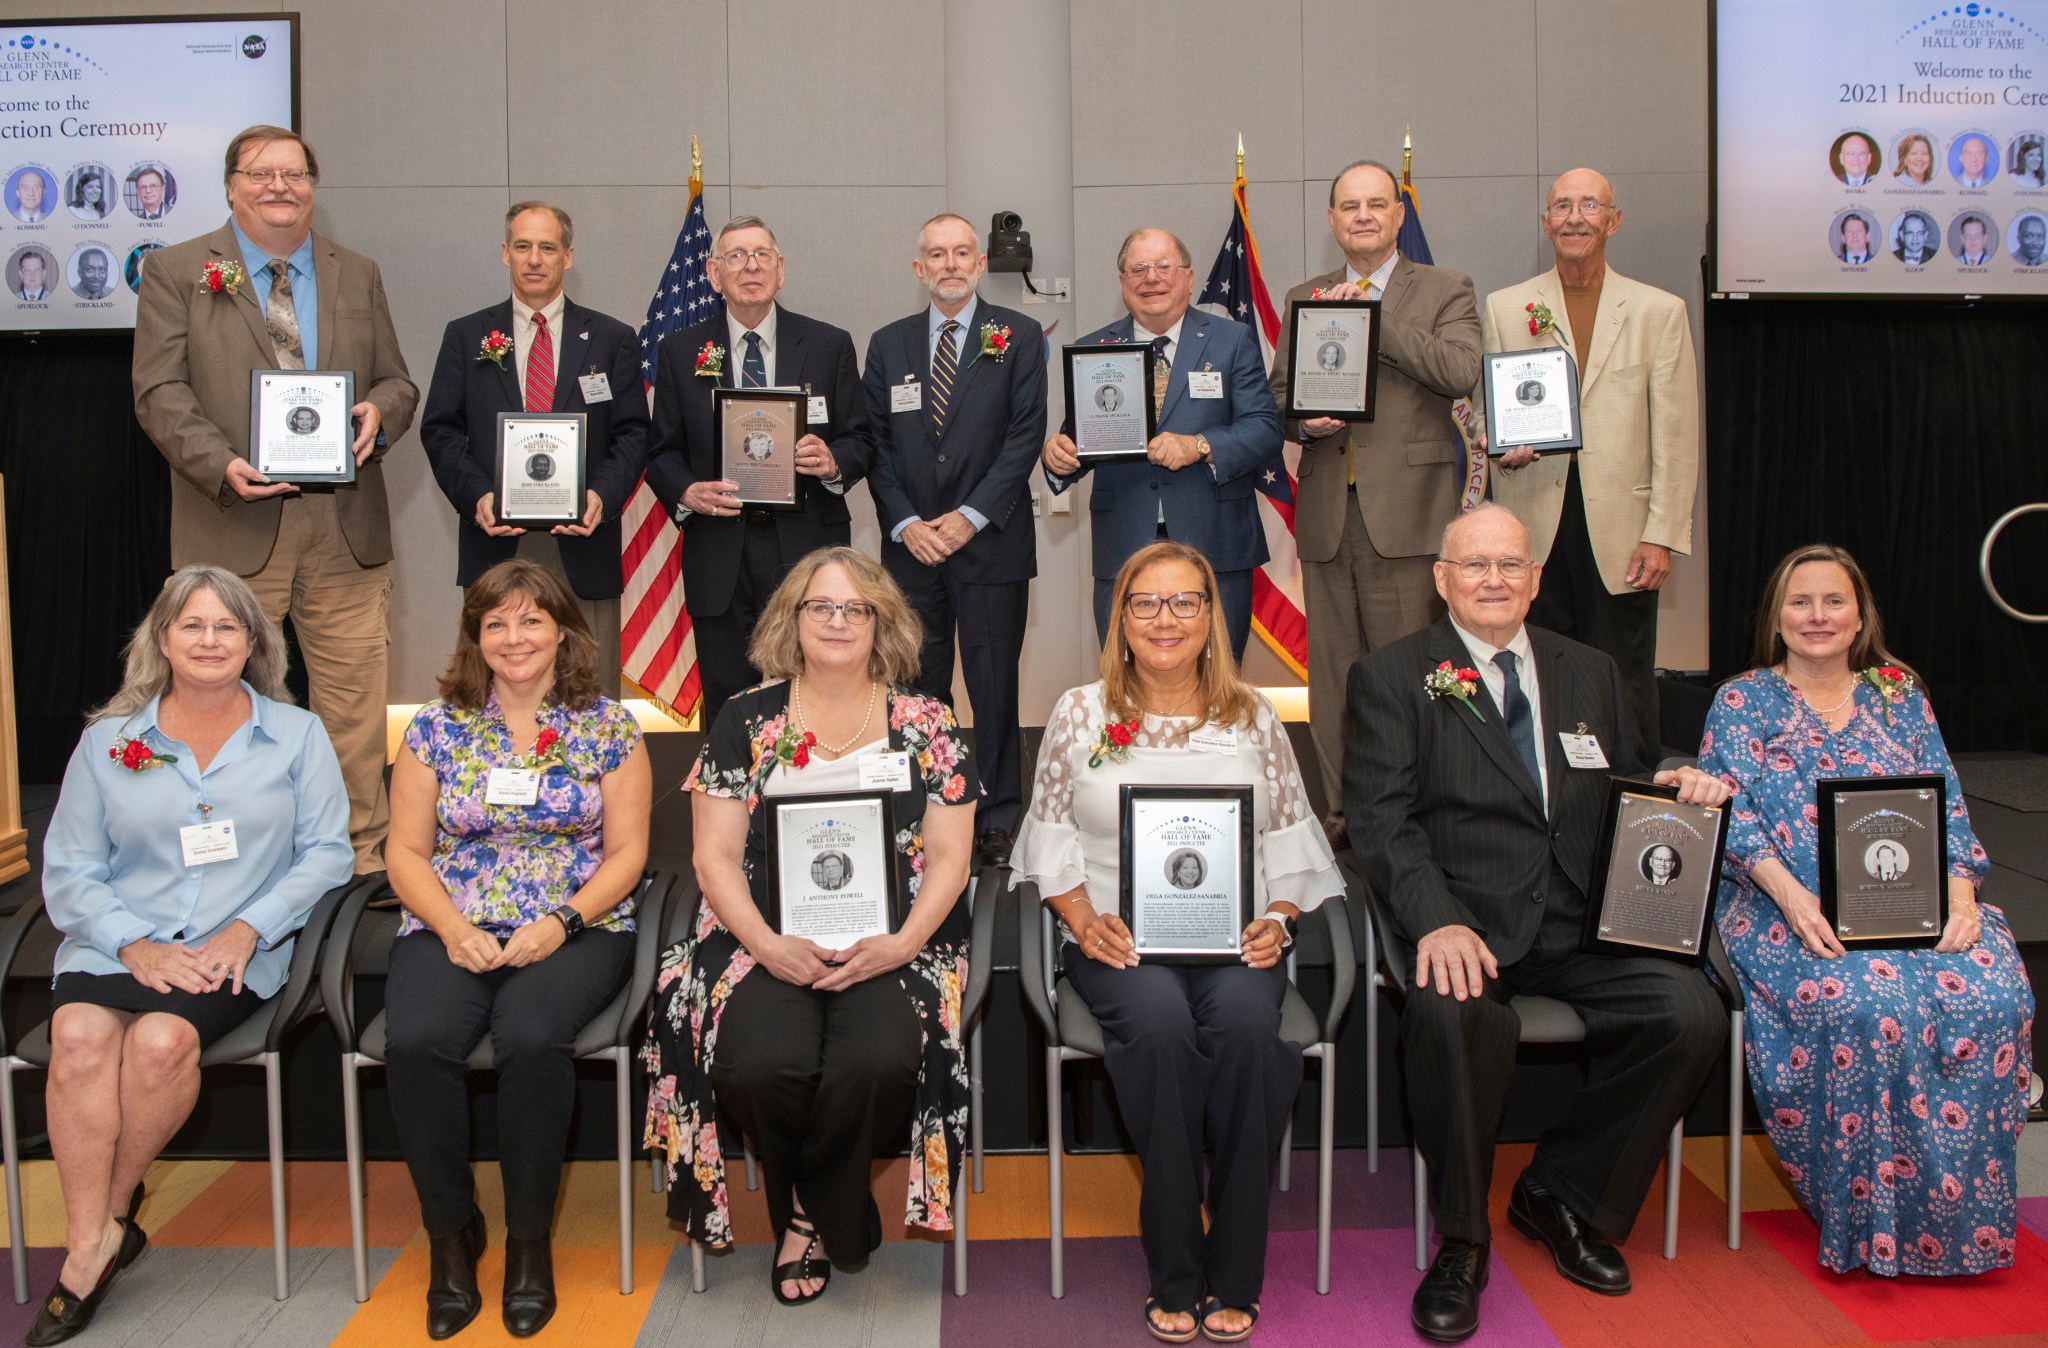 Group of people with plaques posing for photograph.